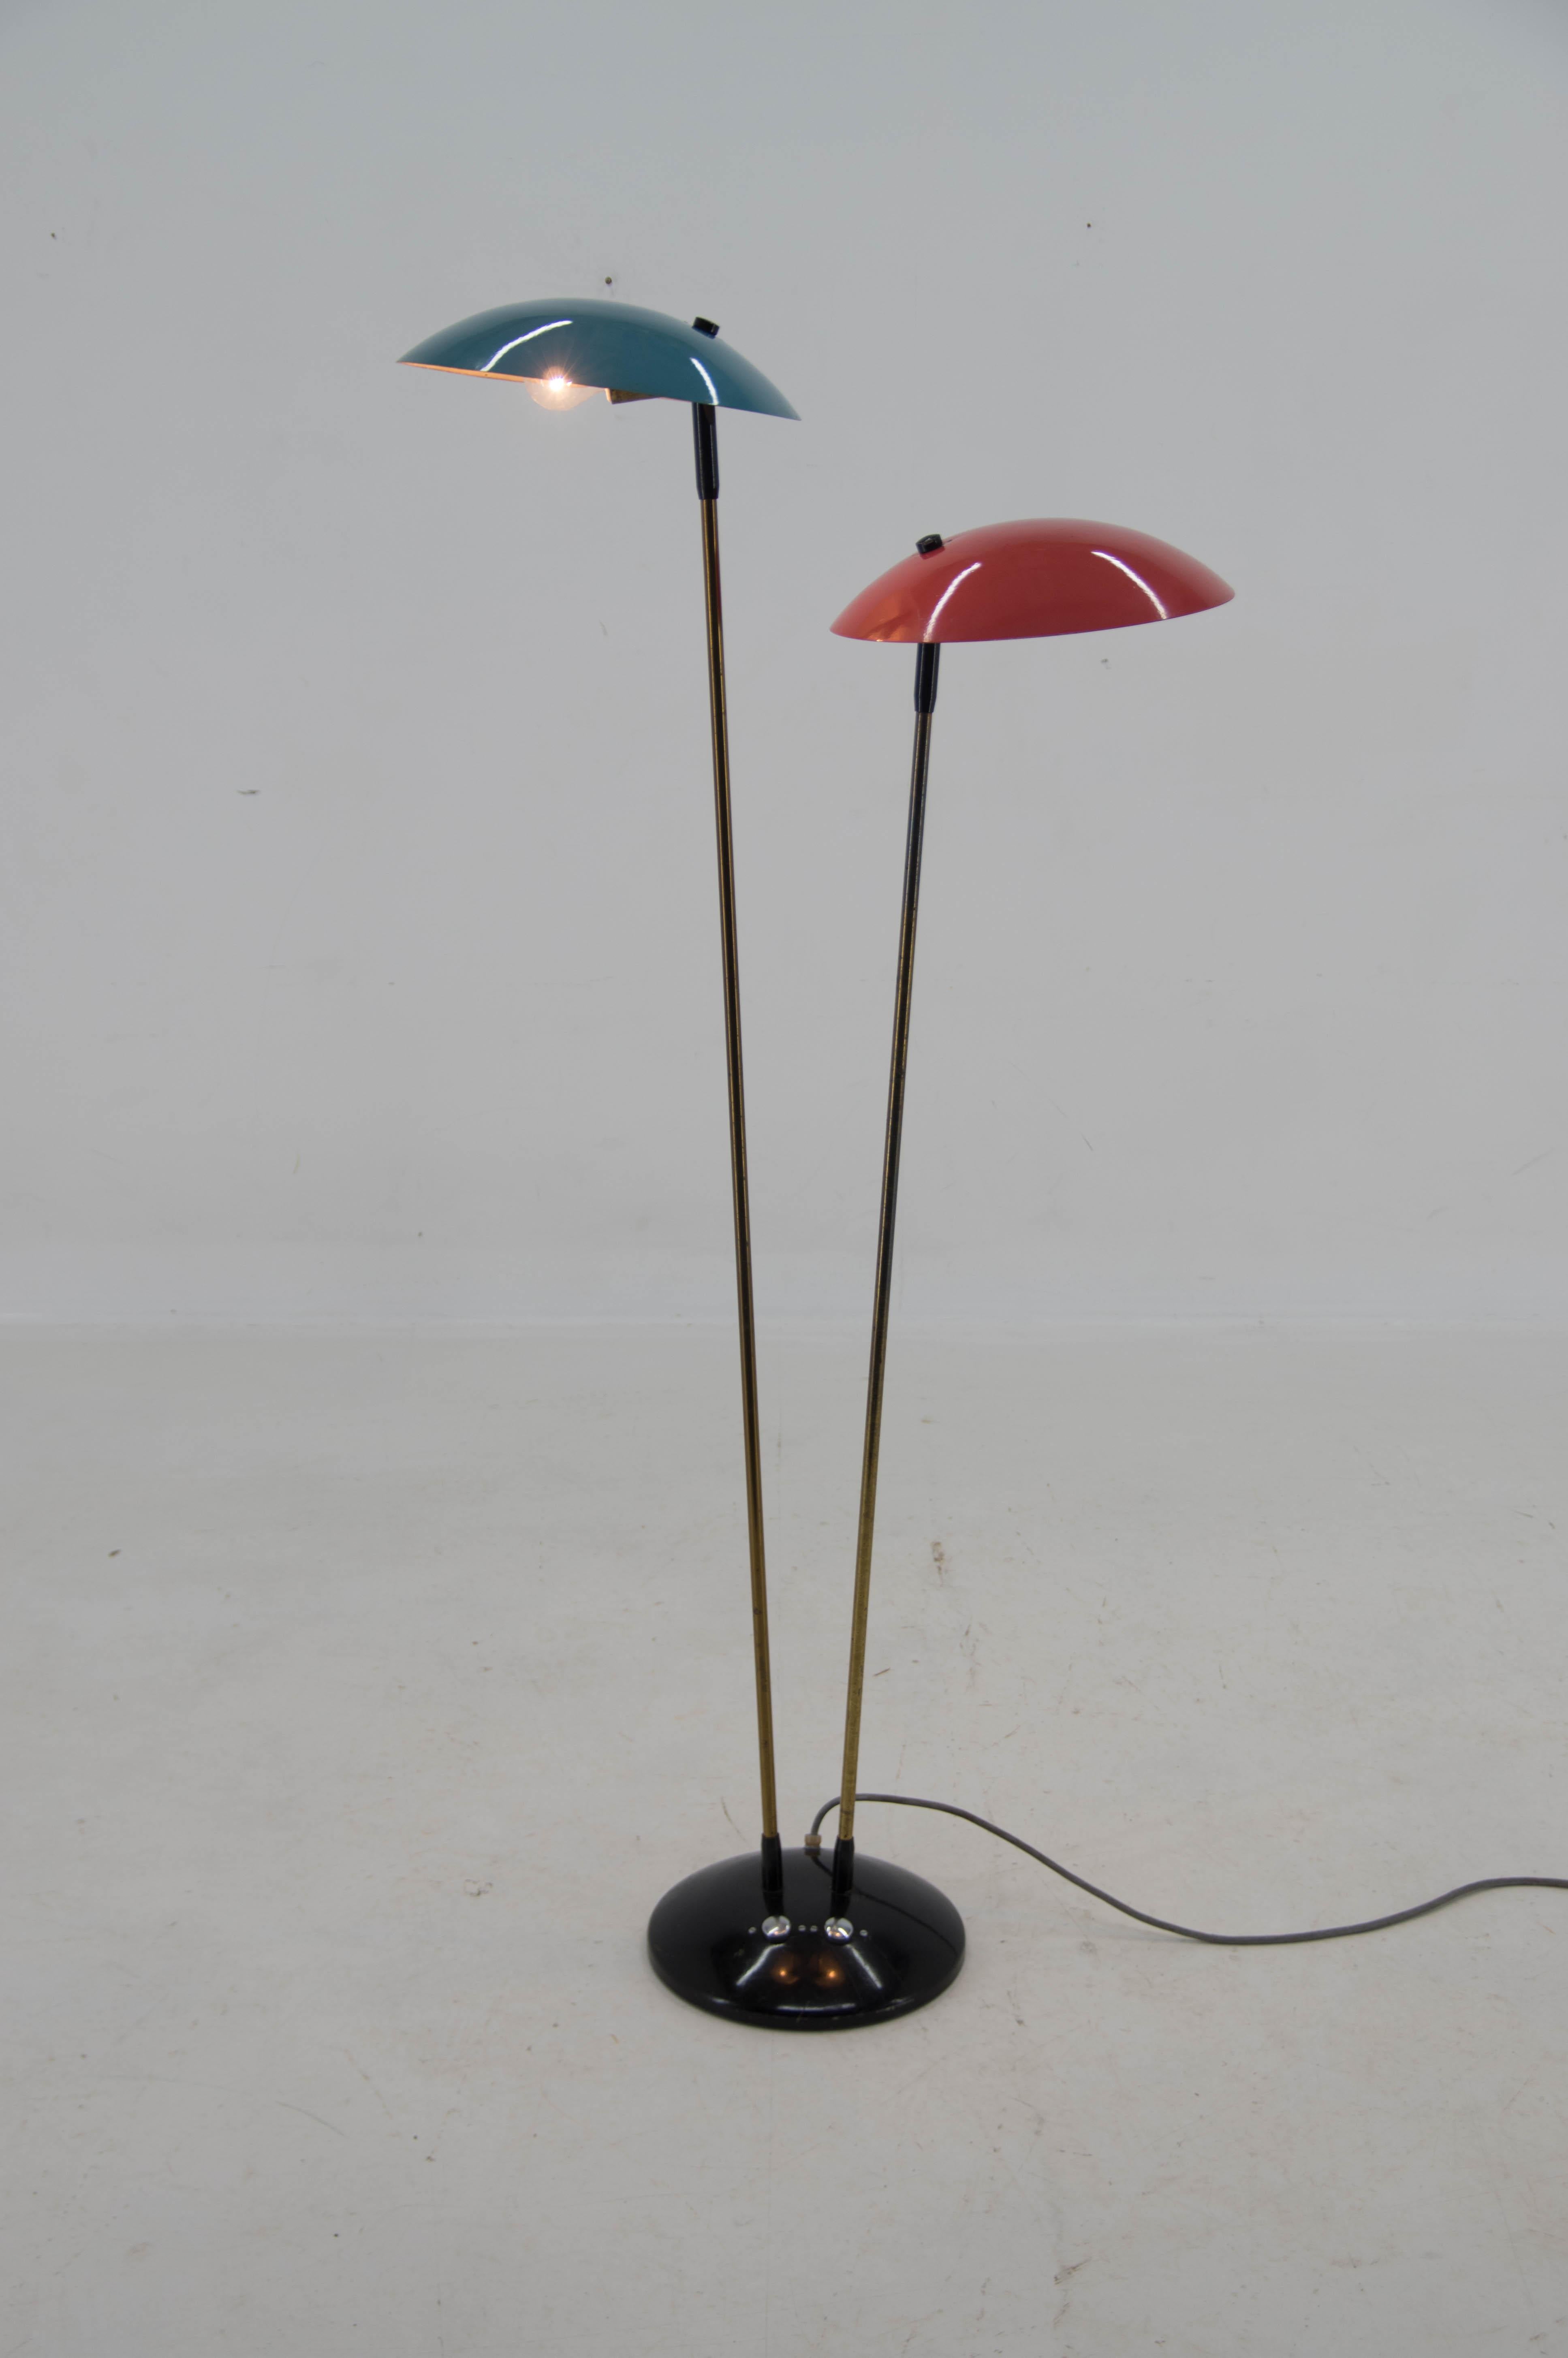 Rare iconic floor lamp by Drukov. Very good original condition with only minor scratches. Cleaned, polished. 2x60W, E27 or E27 or E26 bulbs. Two separate switches. US plug adapter included.
jr